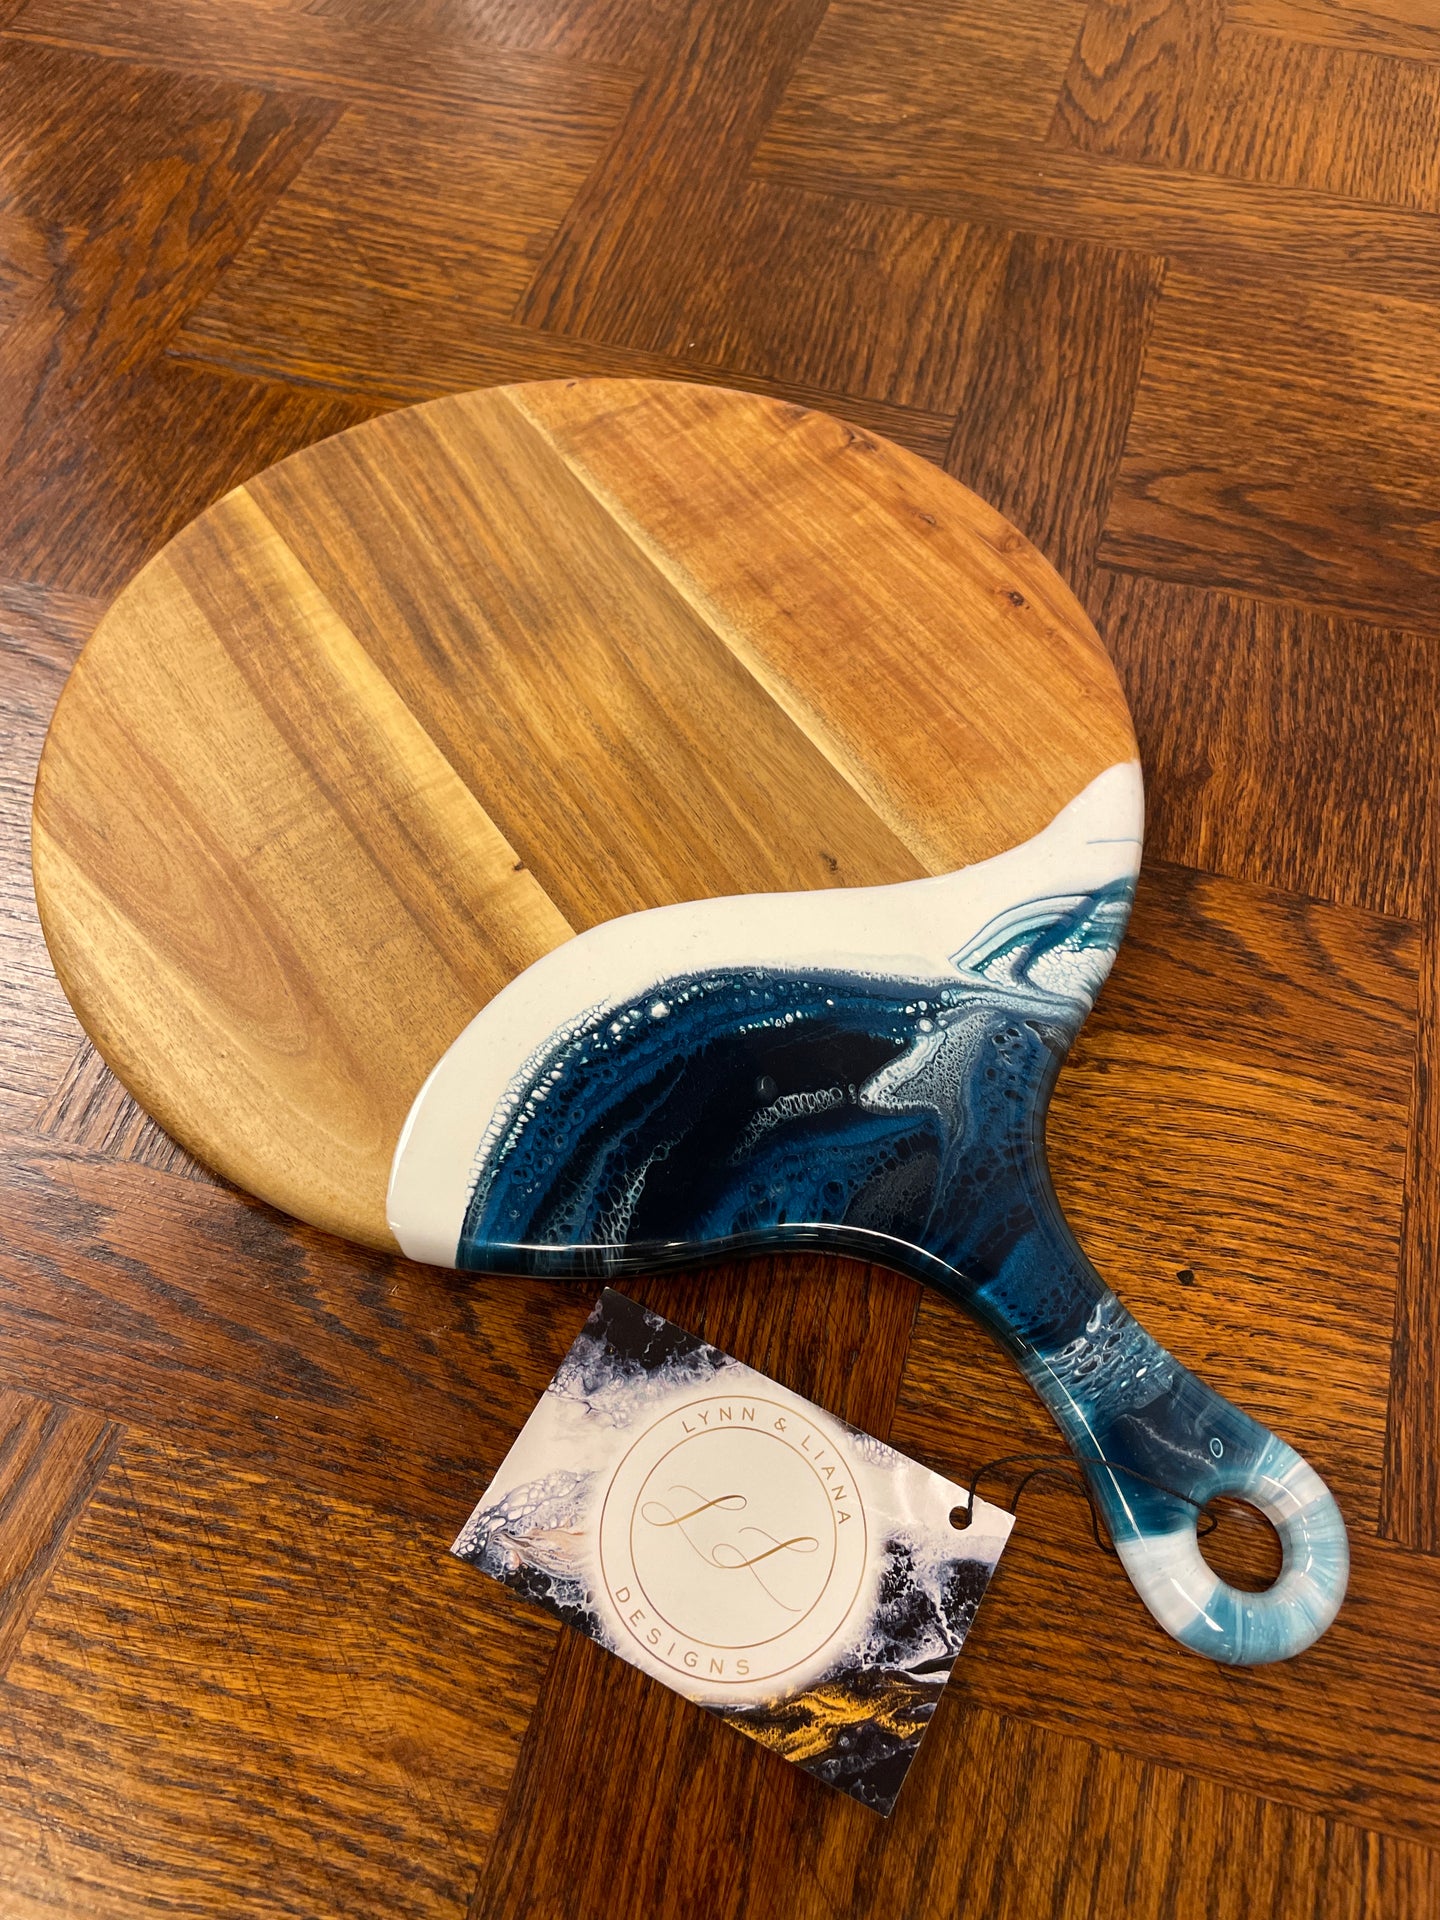 Round Handled Wood Board, Blue and White Resin Design from Lynn and Liana Designs